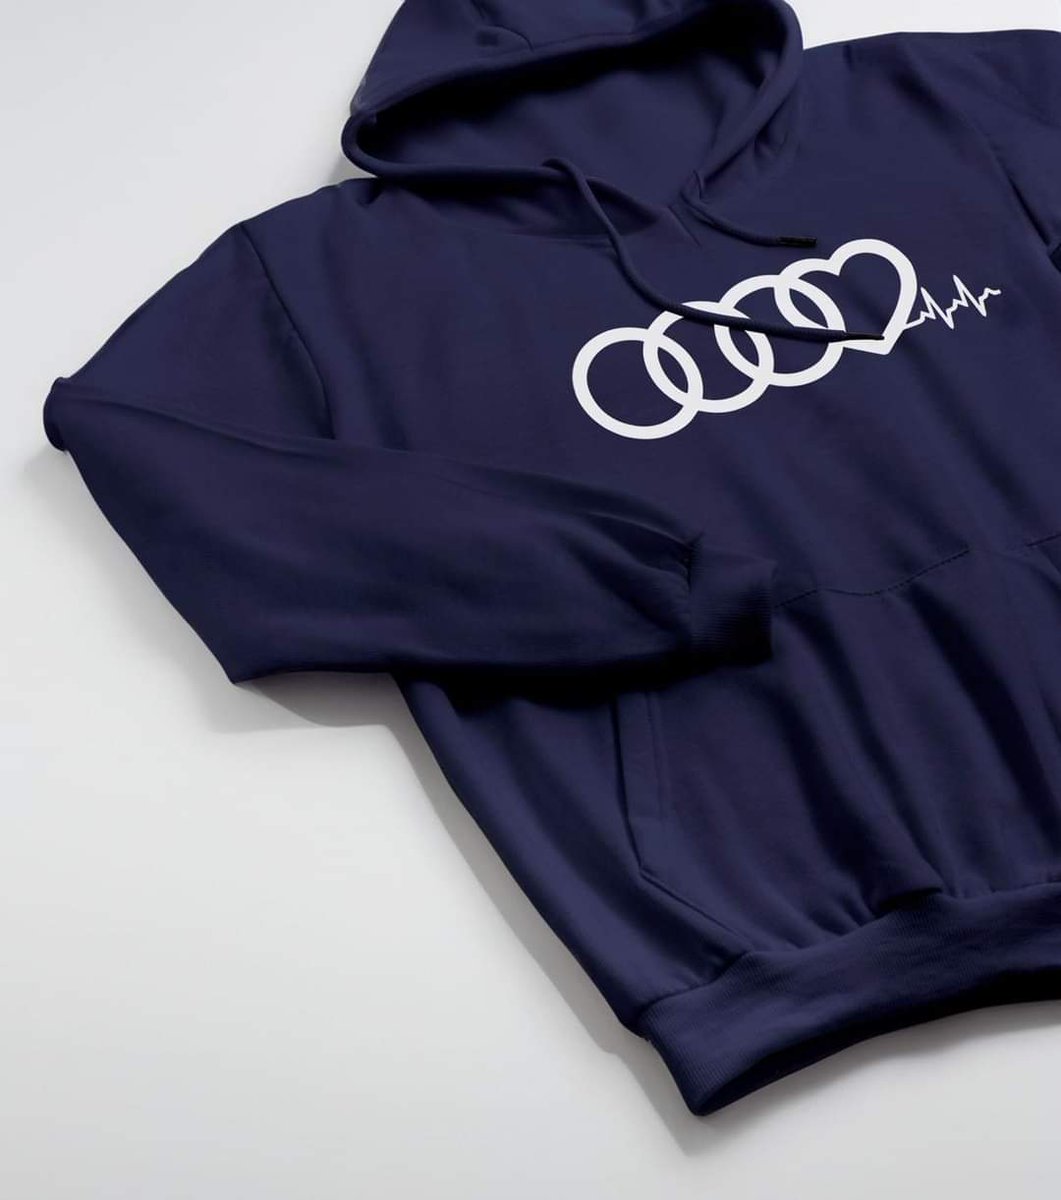 NOW AVAILABLE 

Audi Lifestyle Branded Hoodies 
At $15.06 each piece from Toptrends.ke
To order holla 0739645326
Free delivery within Meru

#Toptrends.ke #AudiLifestyle #OnTheMove #OutAndAbout